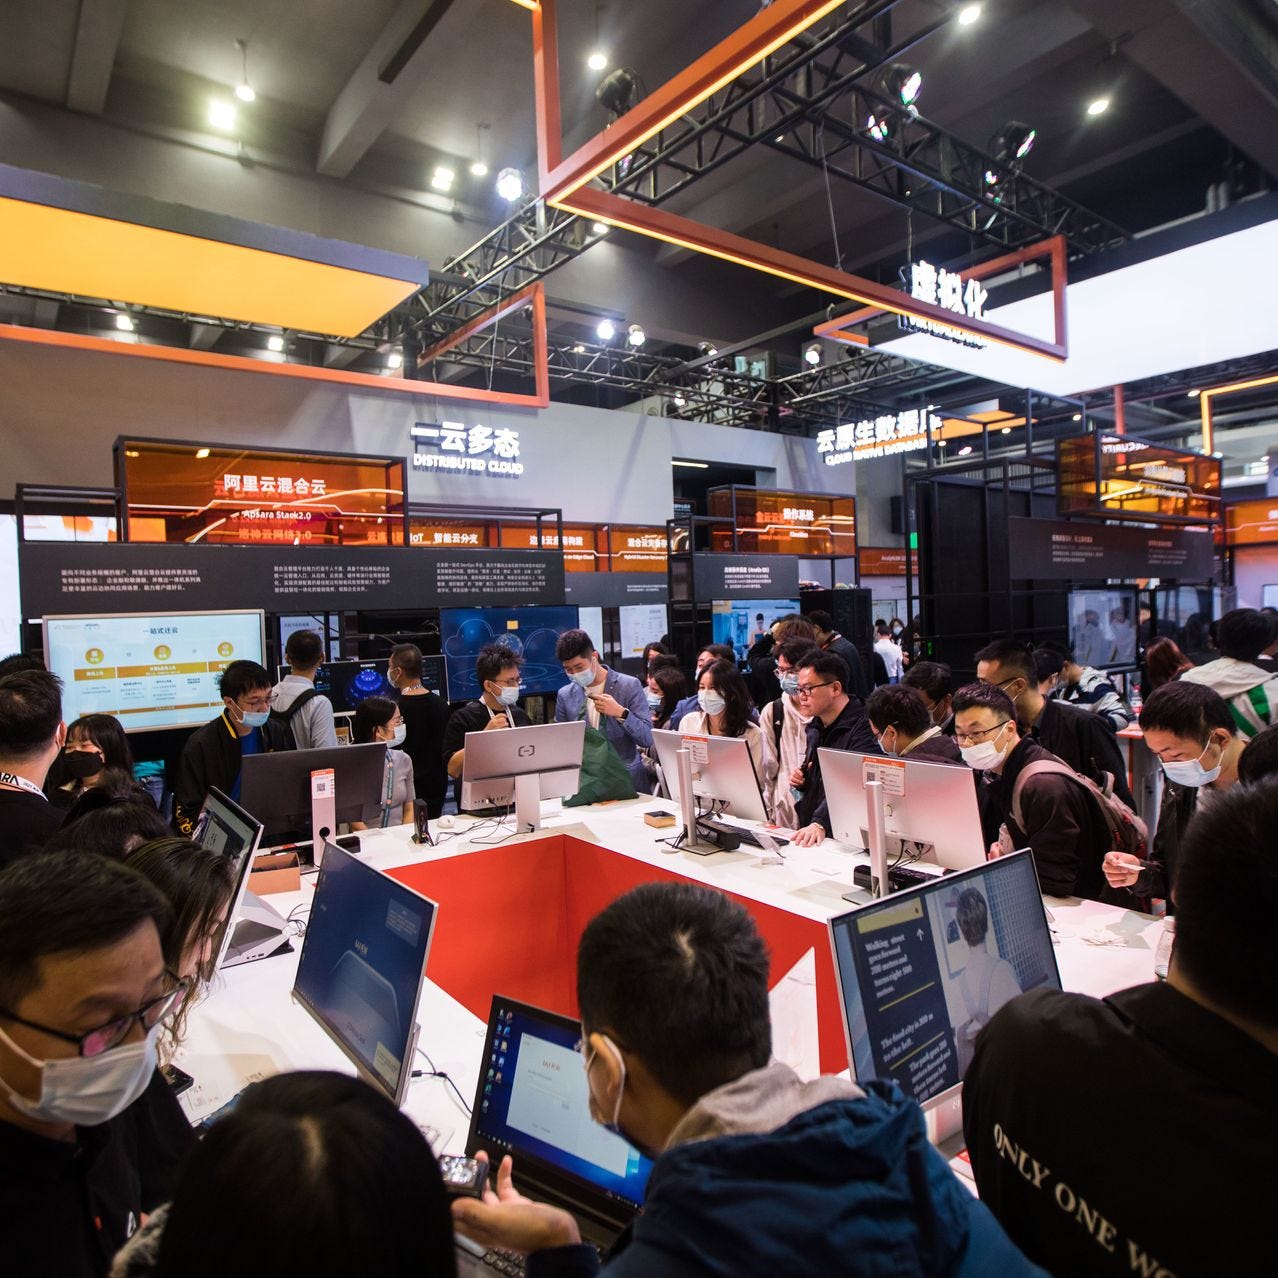 Visitors at the Apsara Conference, an annual cloud service technology forum hosted by Alibaba, in Hangzhou in 2021.